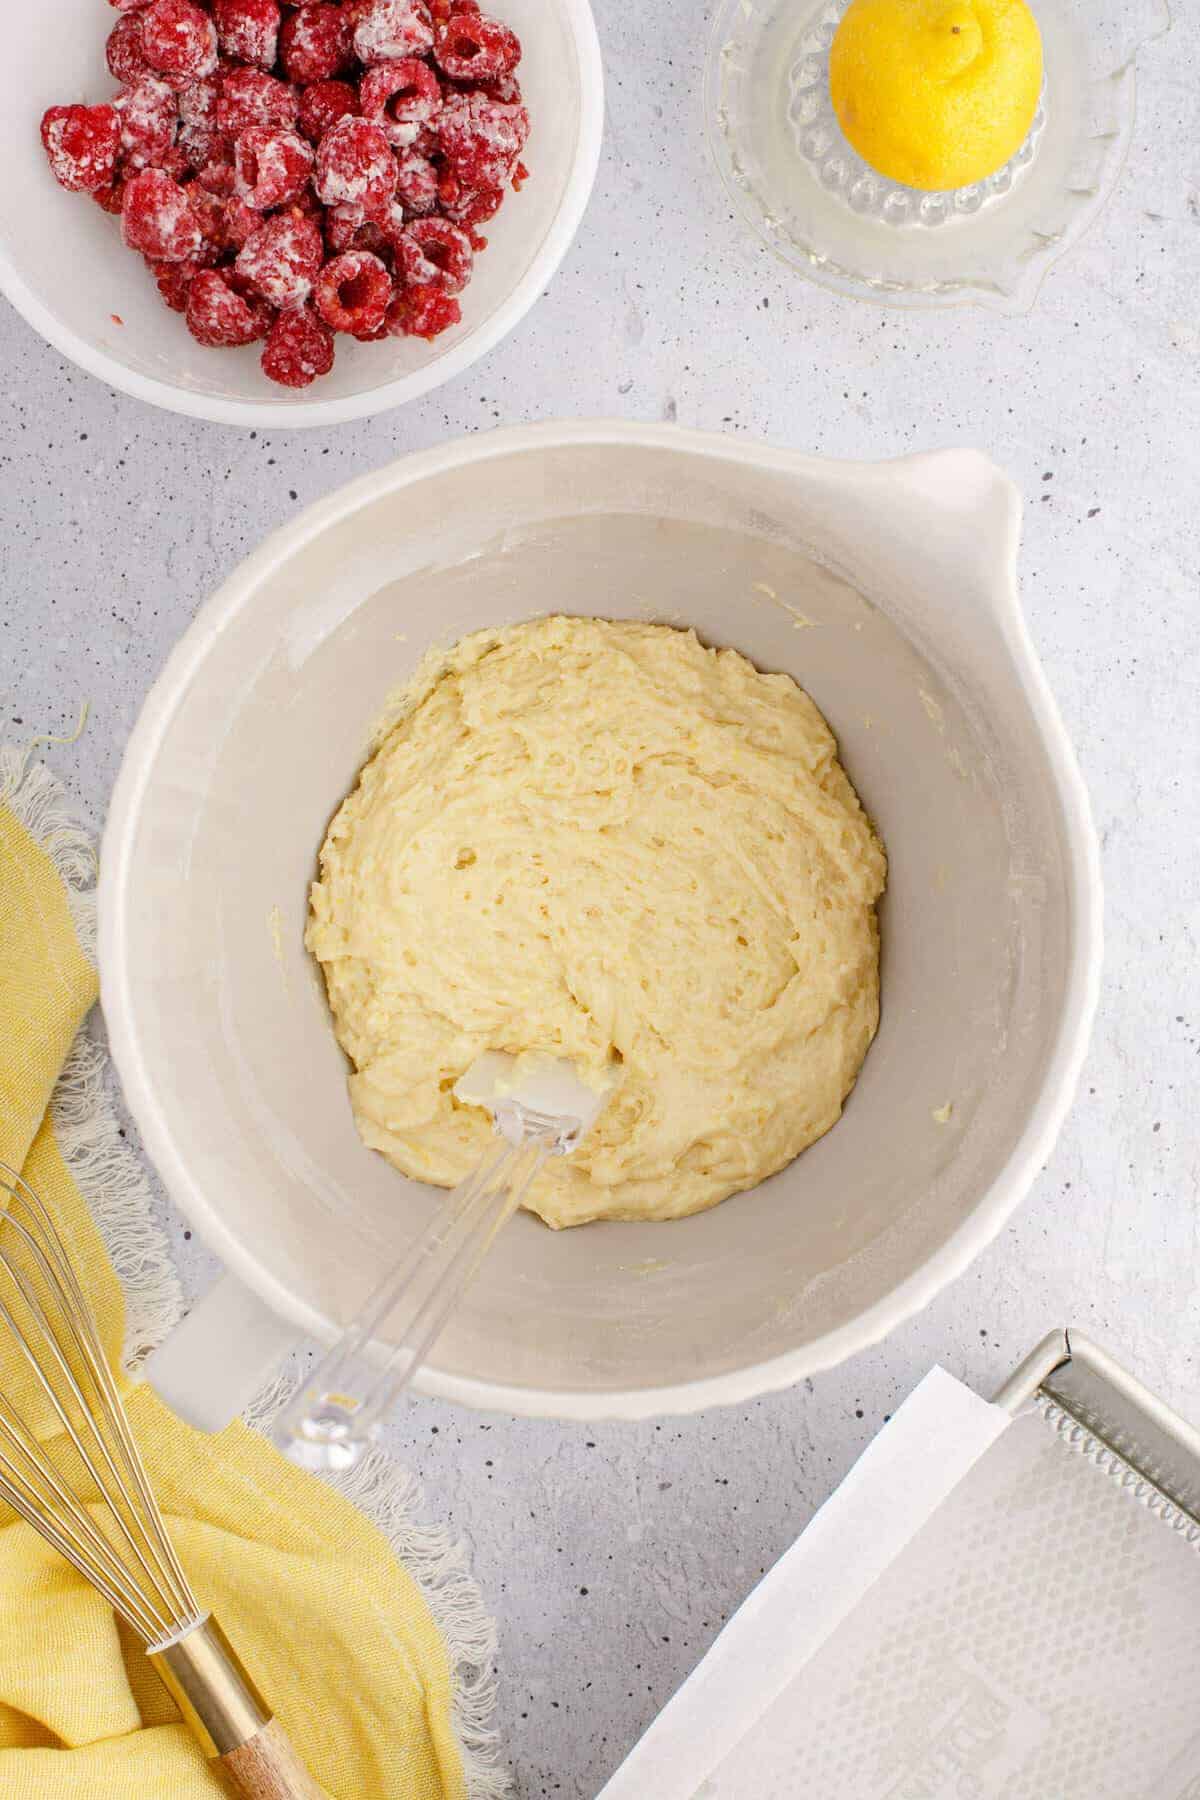 combined dry and wet ingredients in a mixer bowl with a white spatula inside.